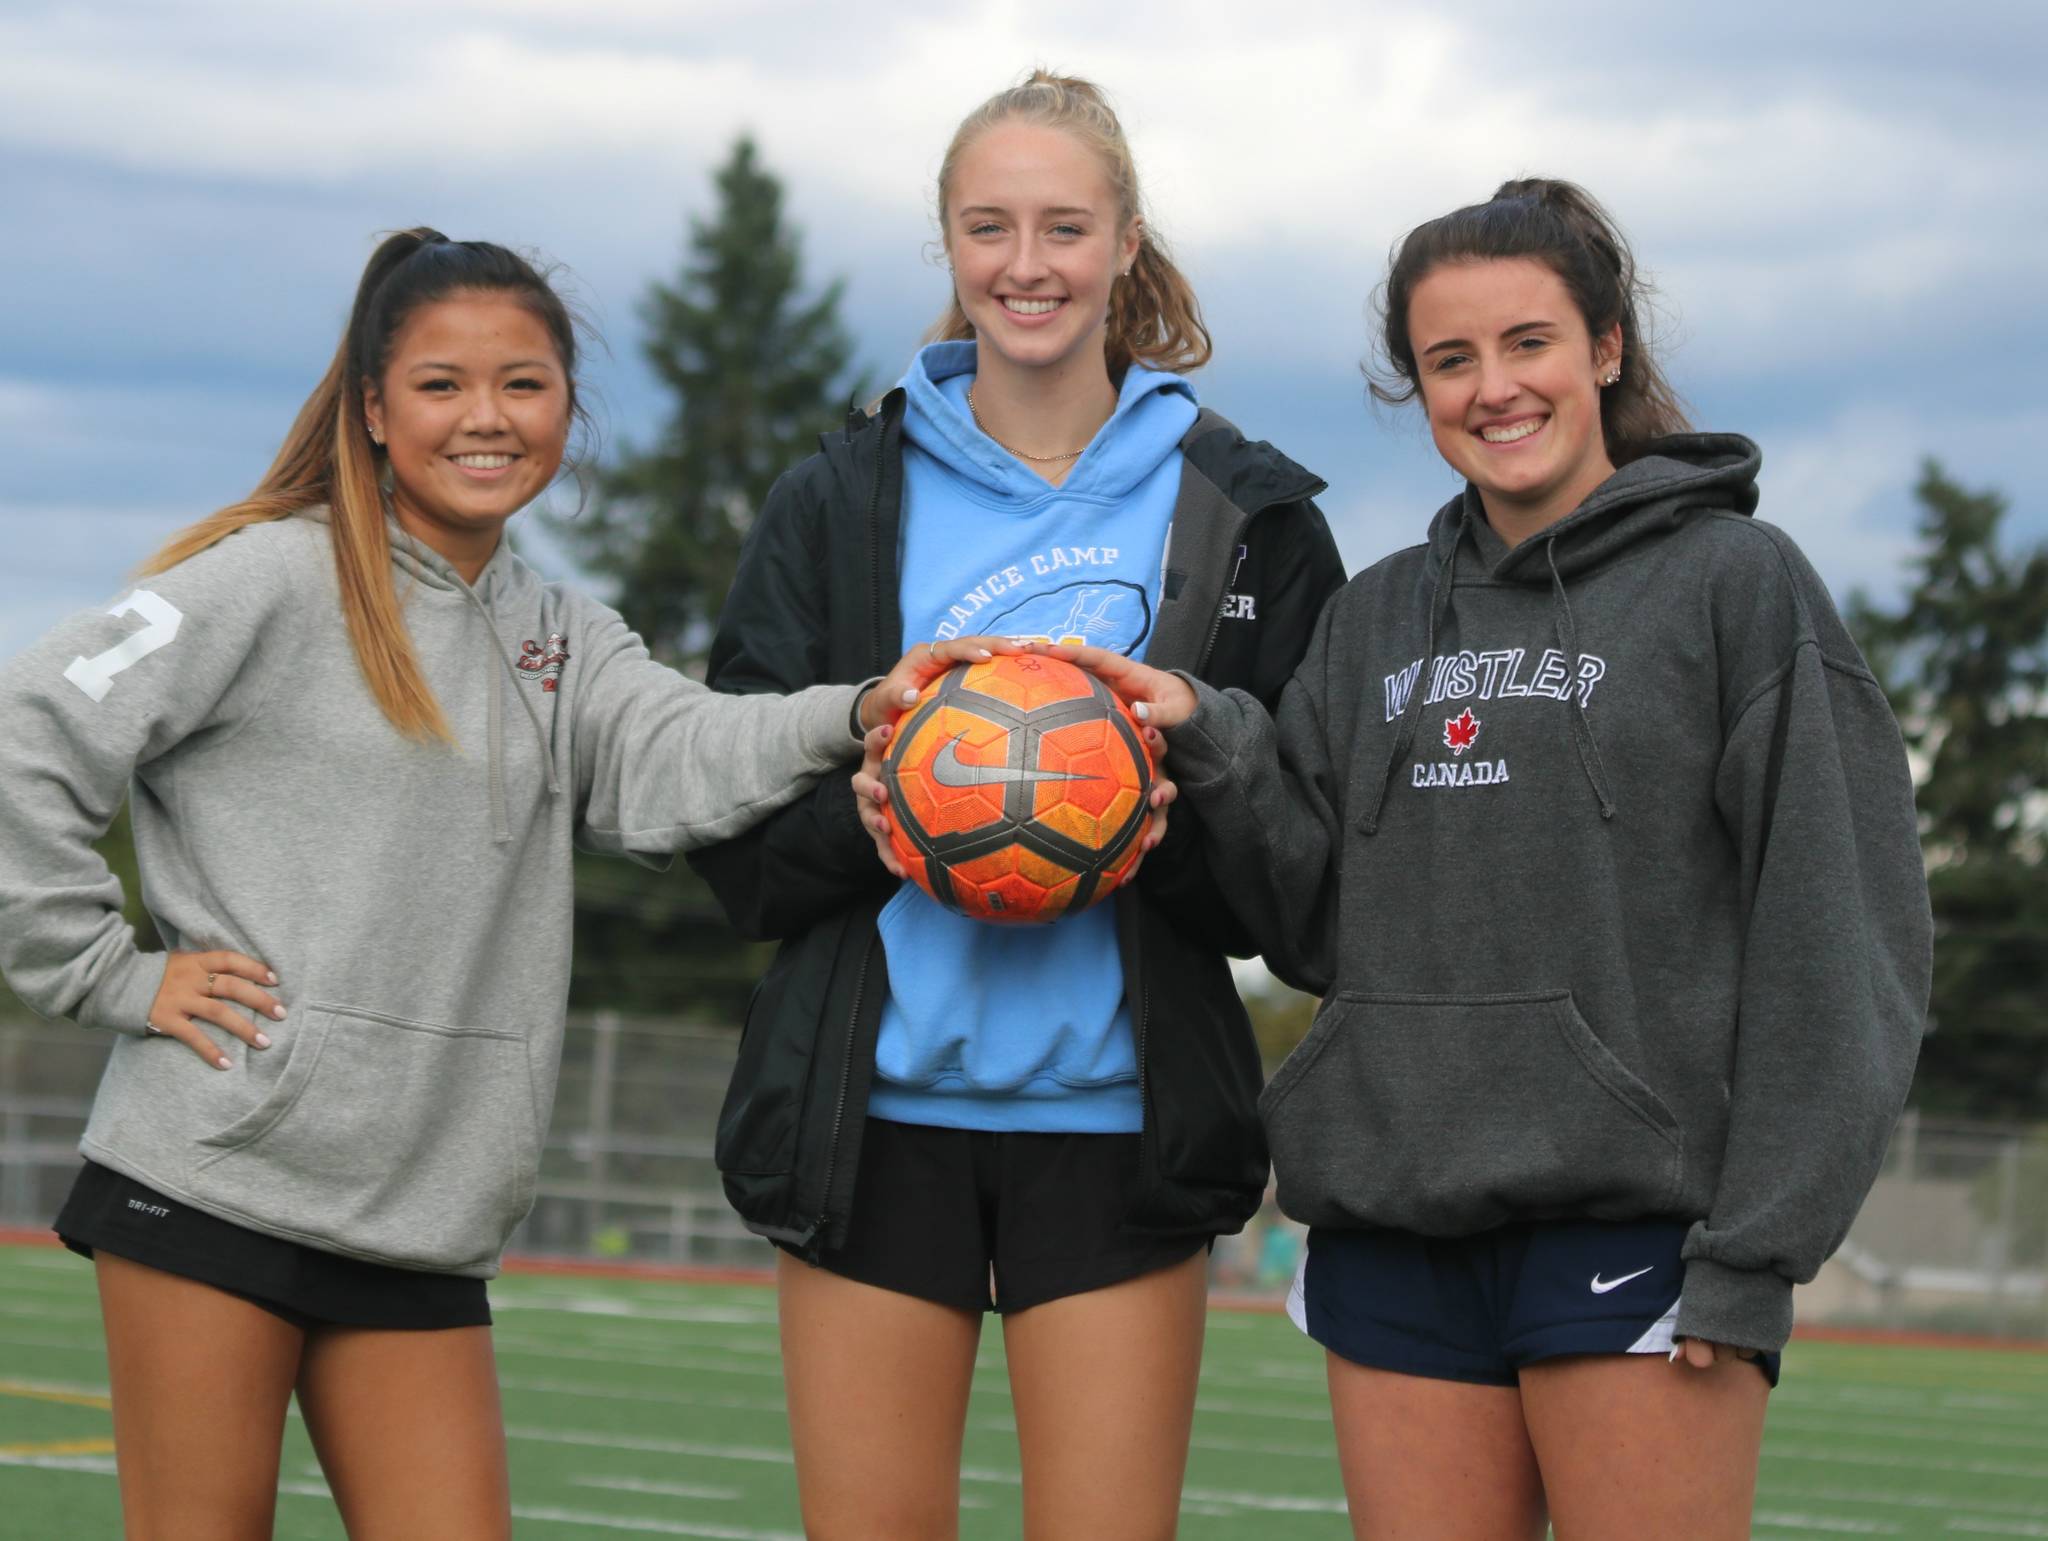 Lake Washington High players, from left, Carlee Betterman, Gracie Sturdevant and Megan McCarthy. Andy Nystrom, Kirkland Reporter